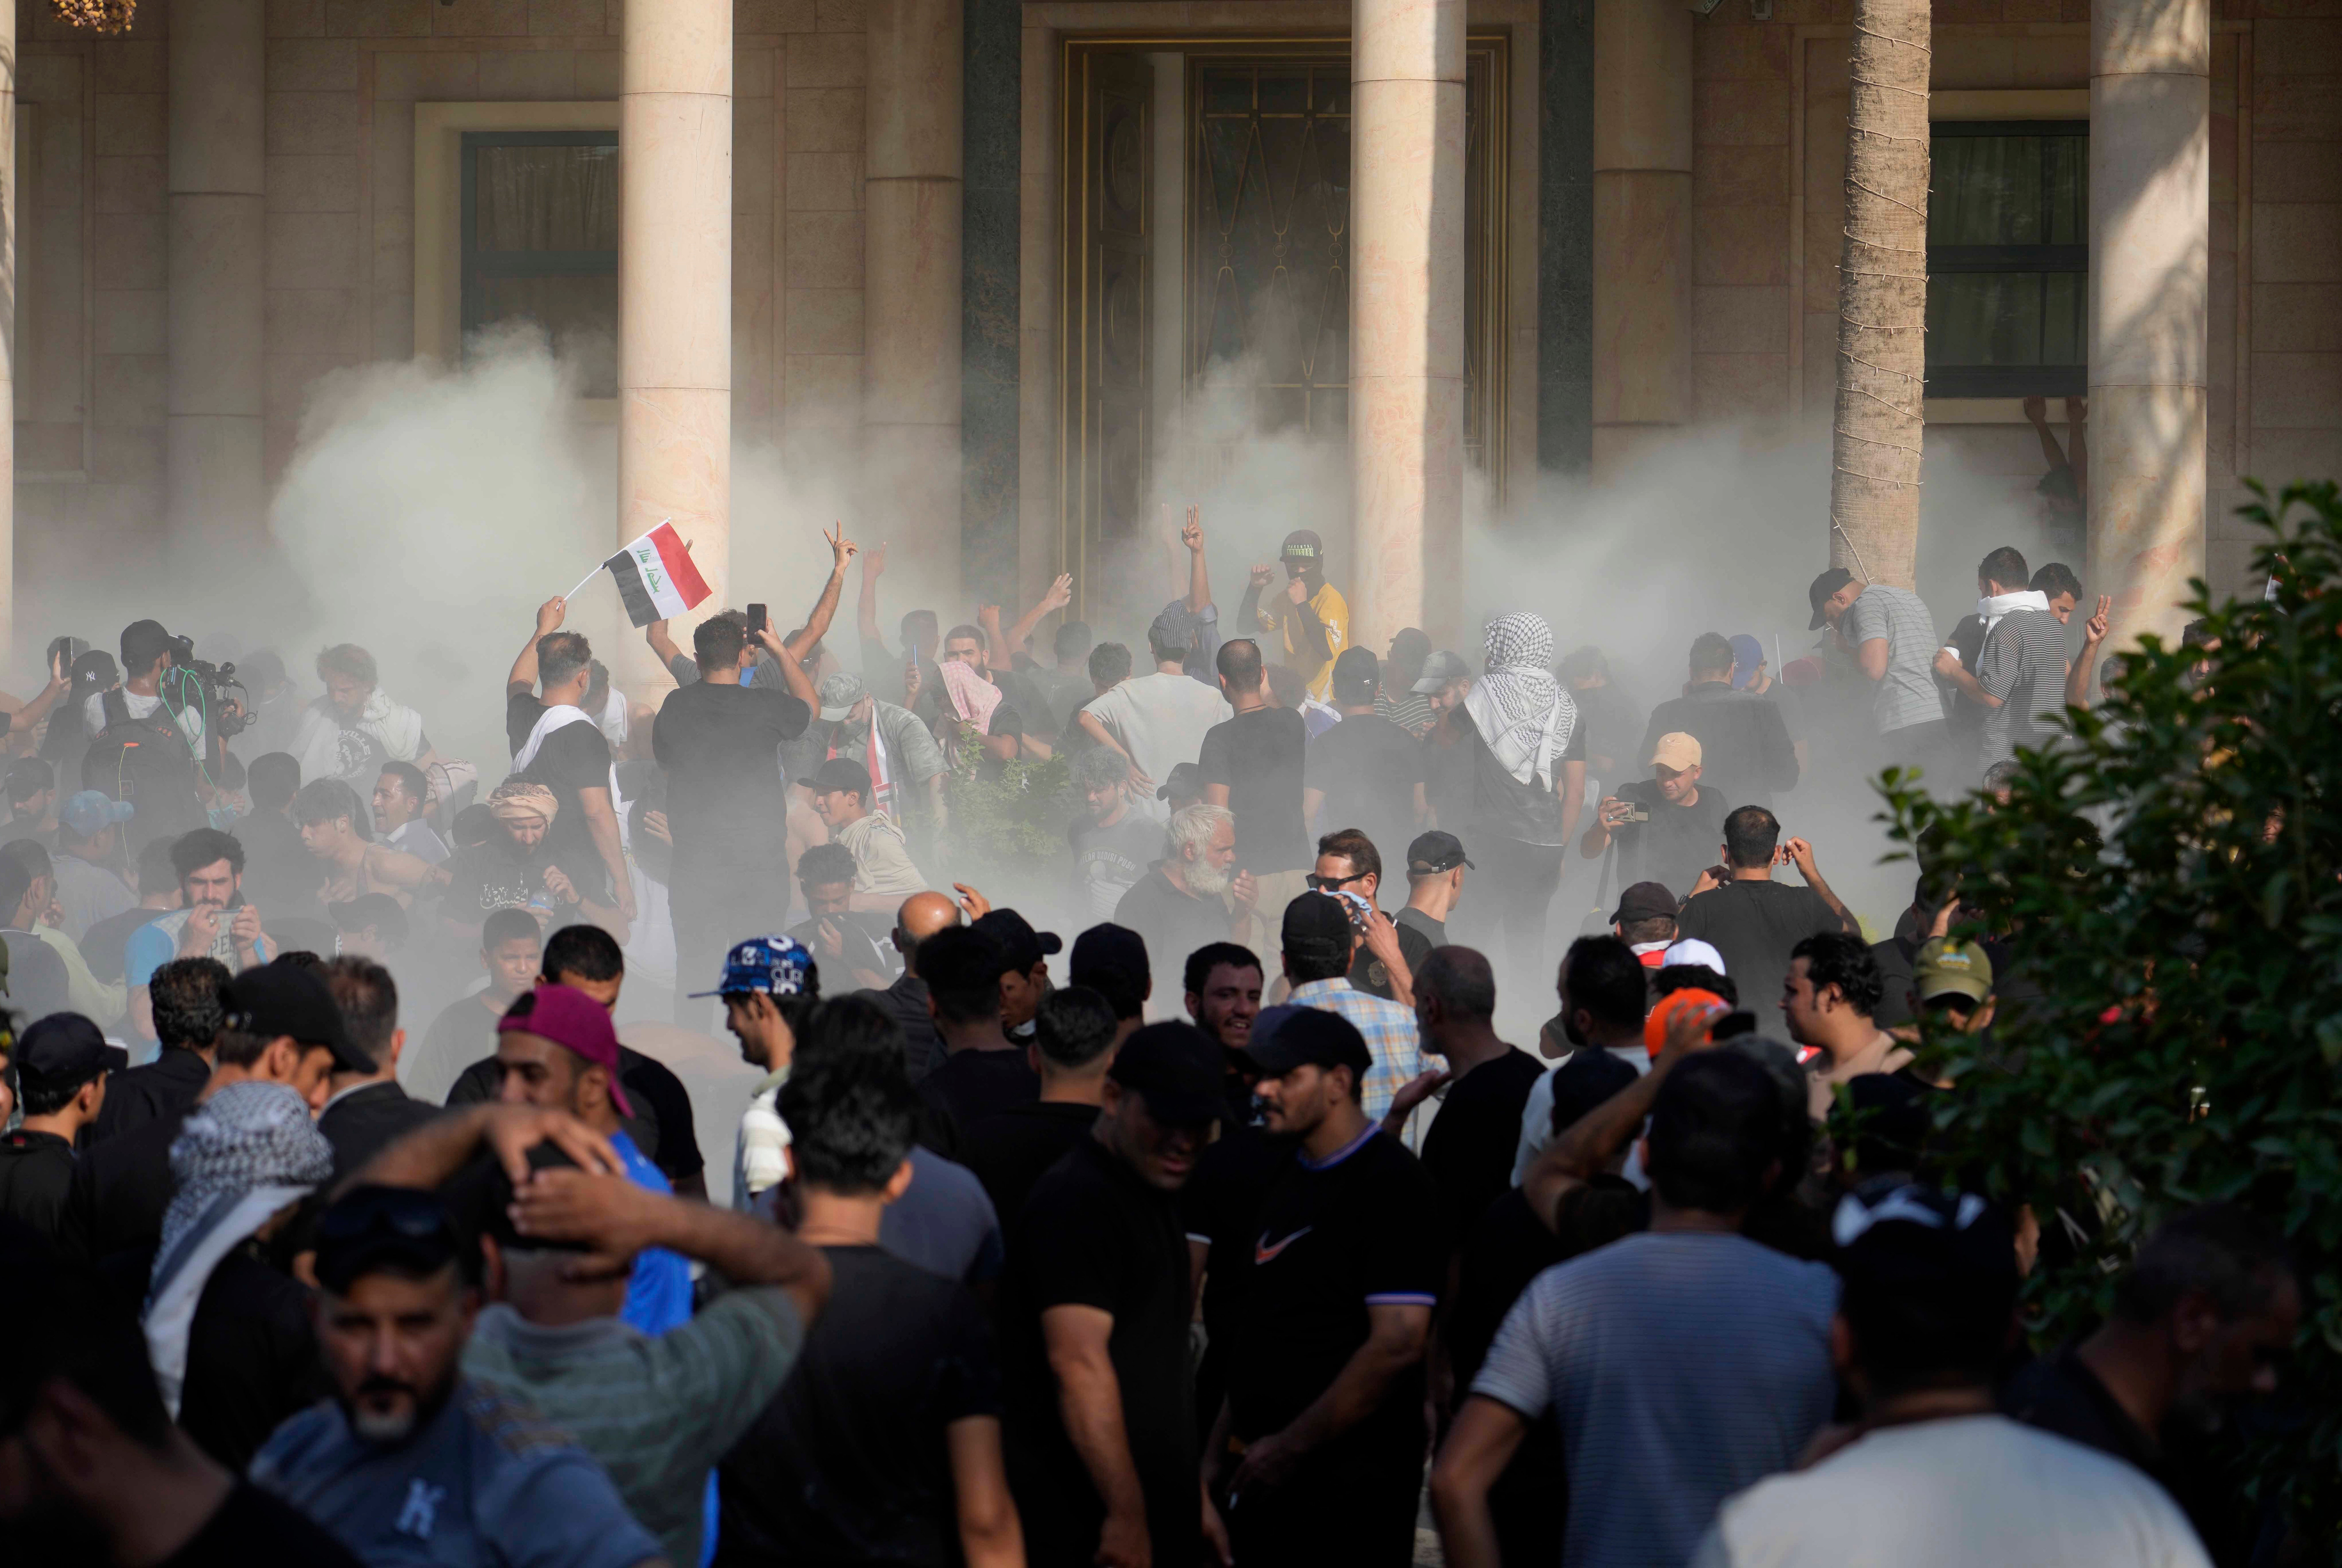 Baghdad, Iraq violence leaves at least 30 dead, cleric tells protesters to ...